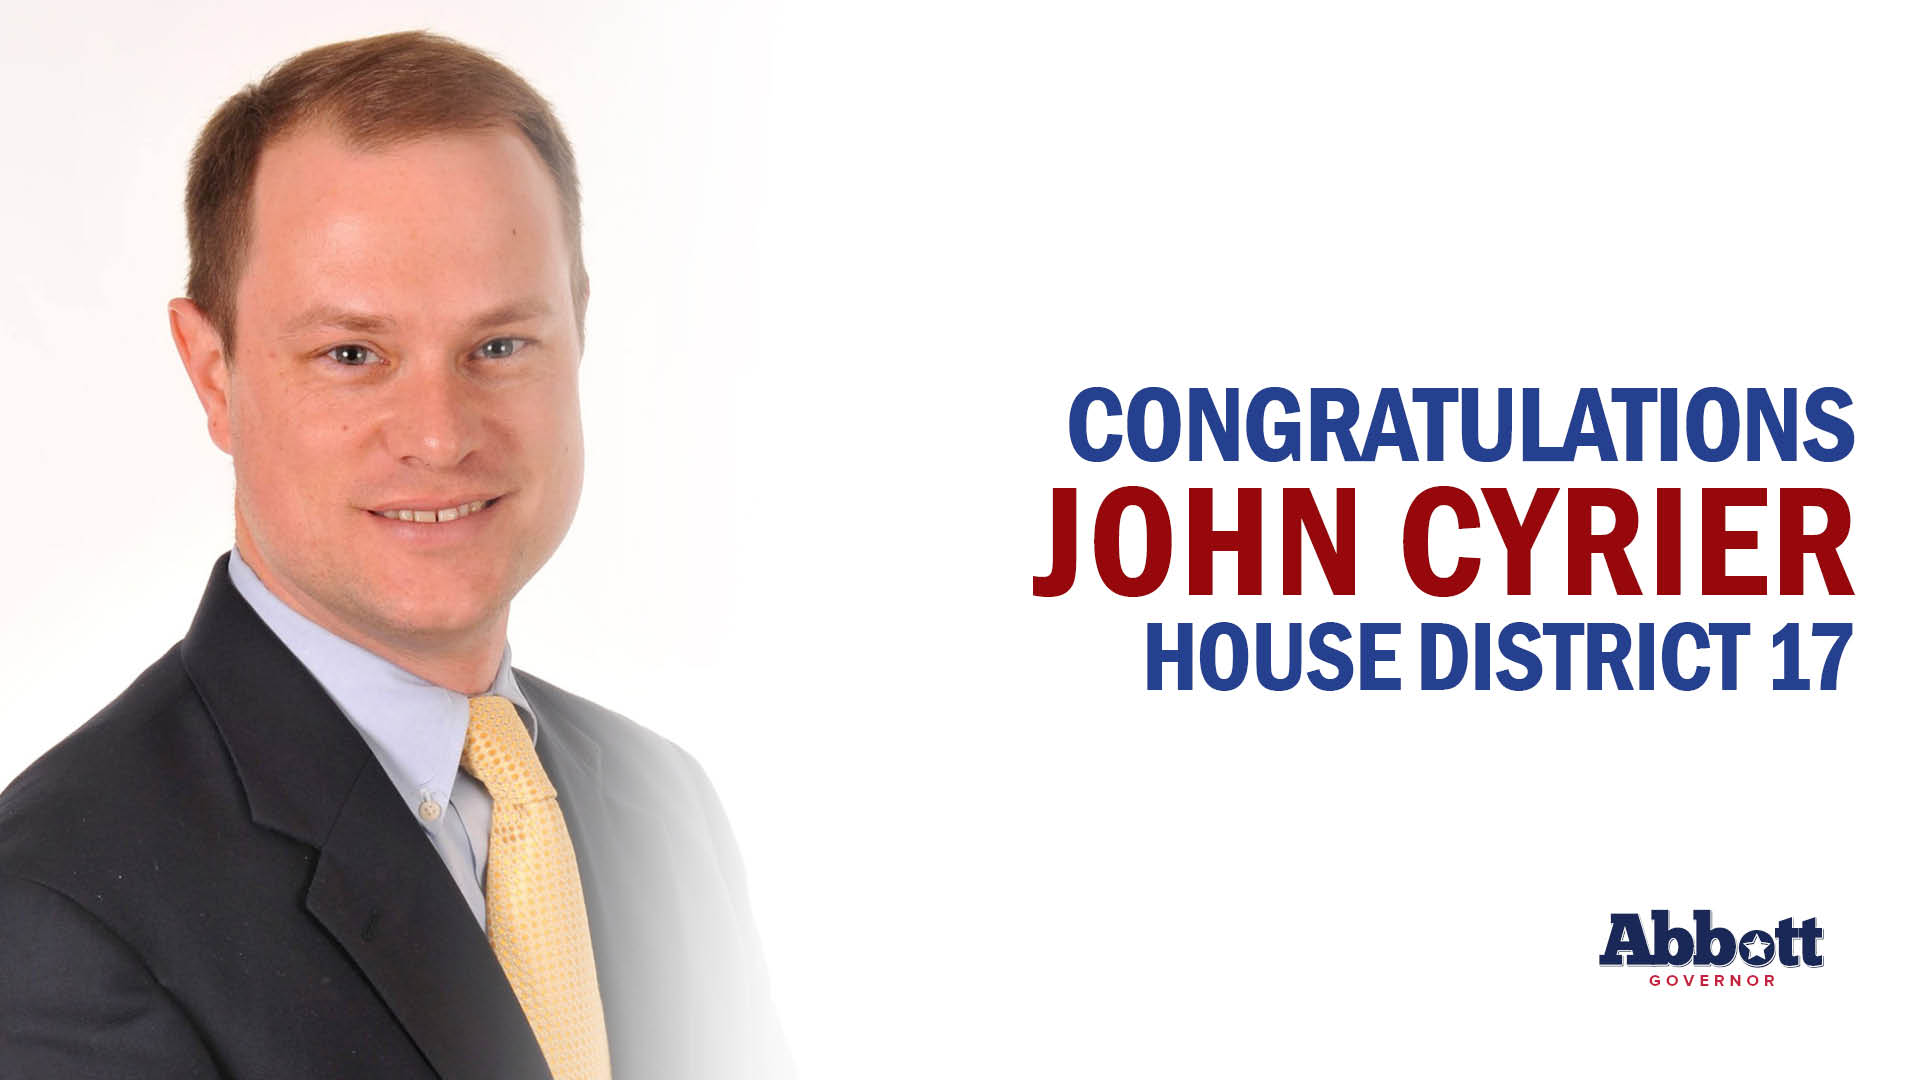 Governor Abbott Applauds Rep. John Cyrier On Re-Election Victory